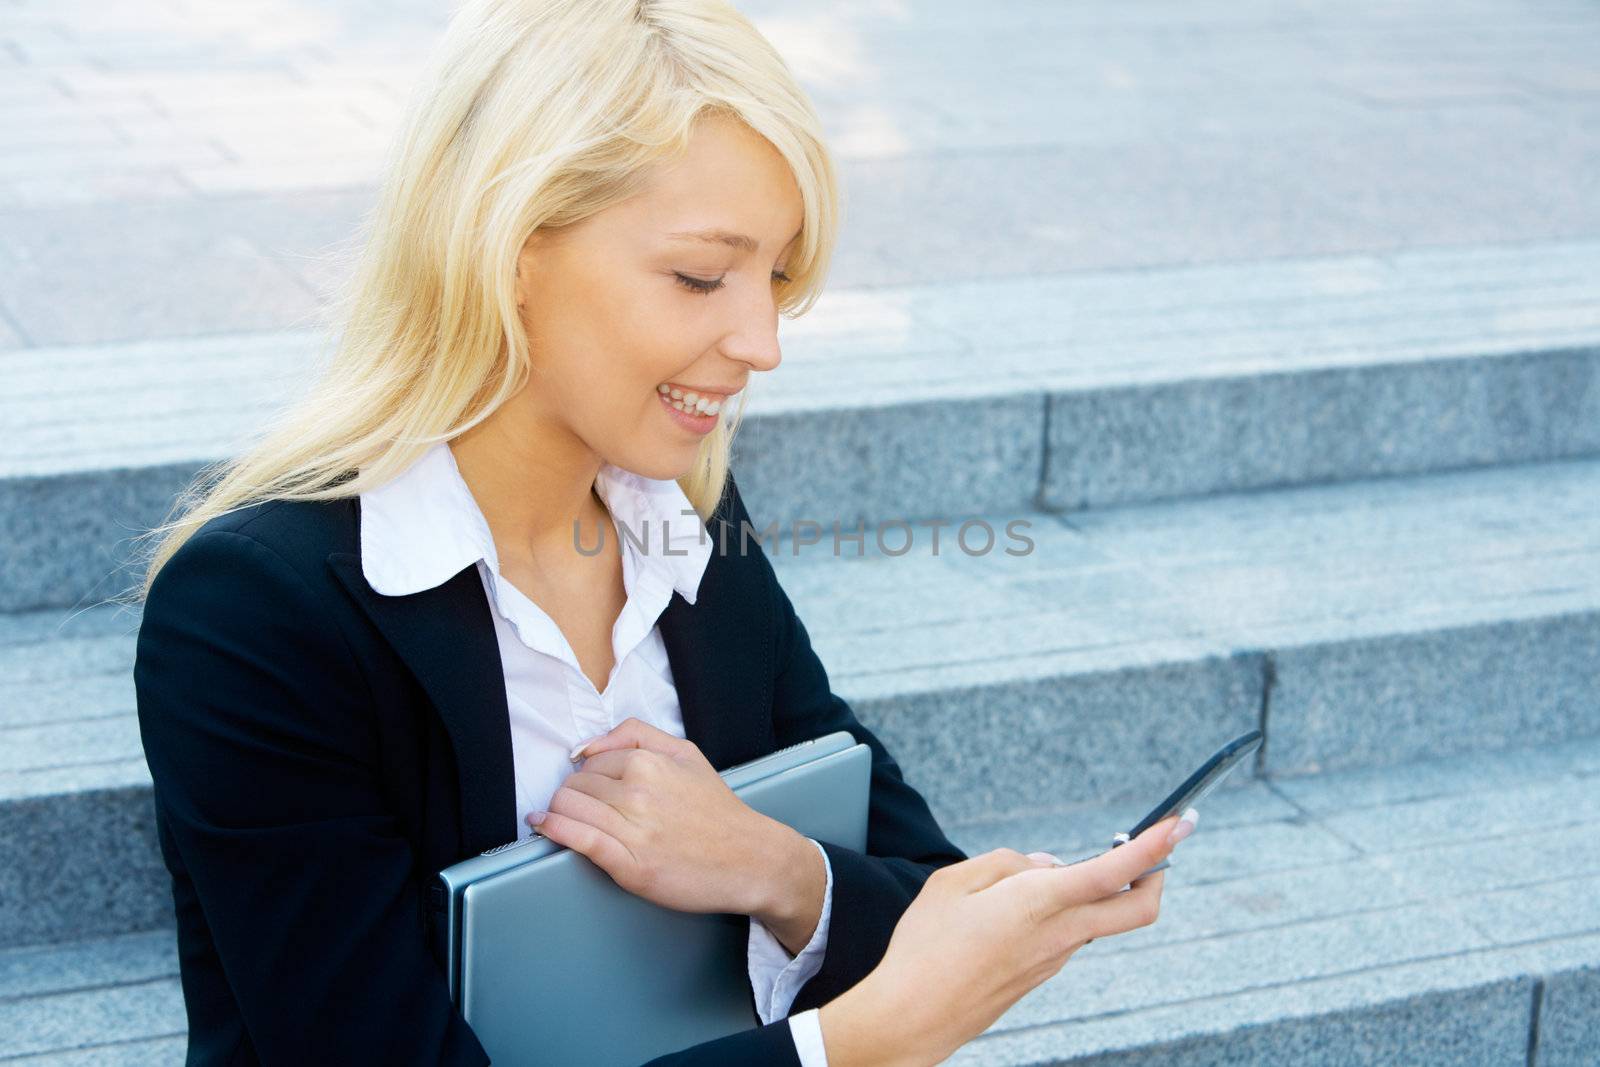 Young businesswoman sitting on stairway, looking at cell phone